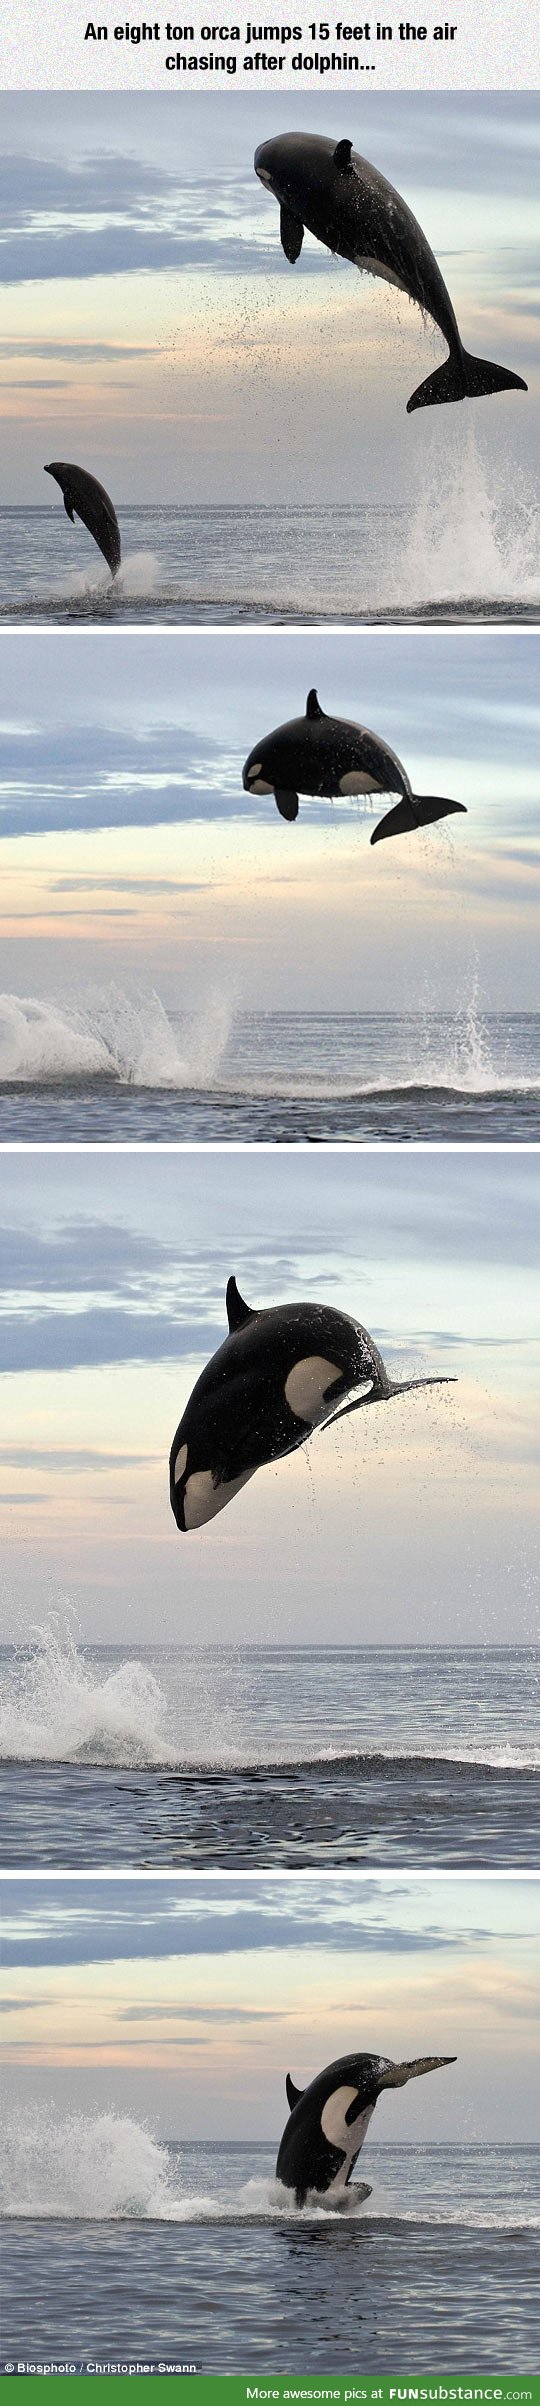 dear me 2nd orca related post in a week